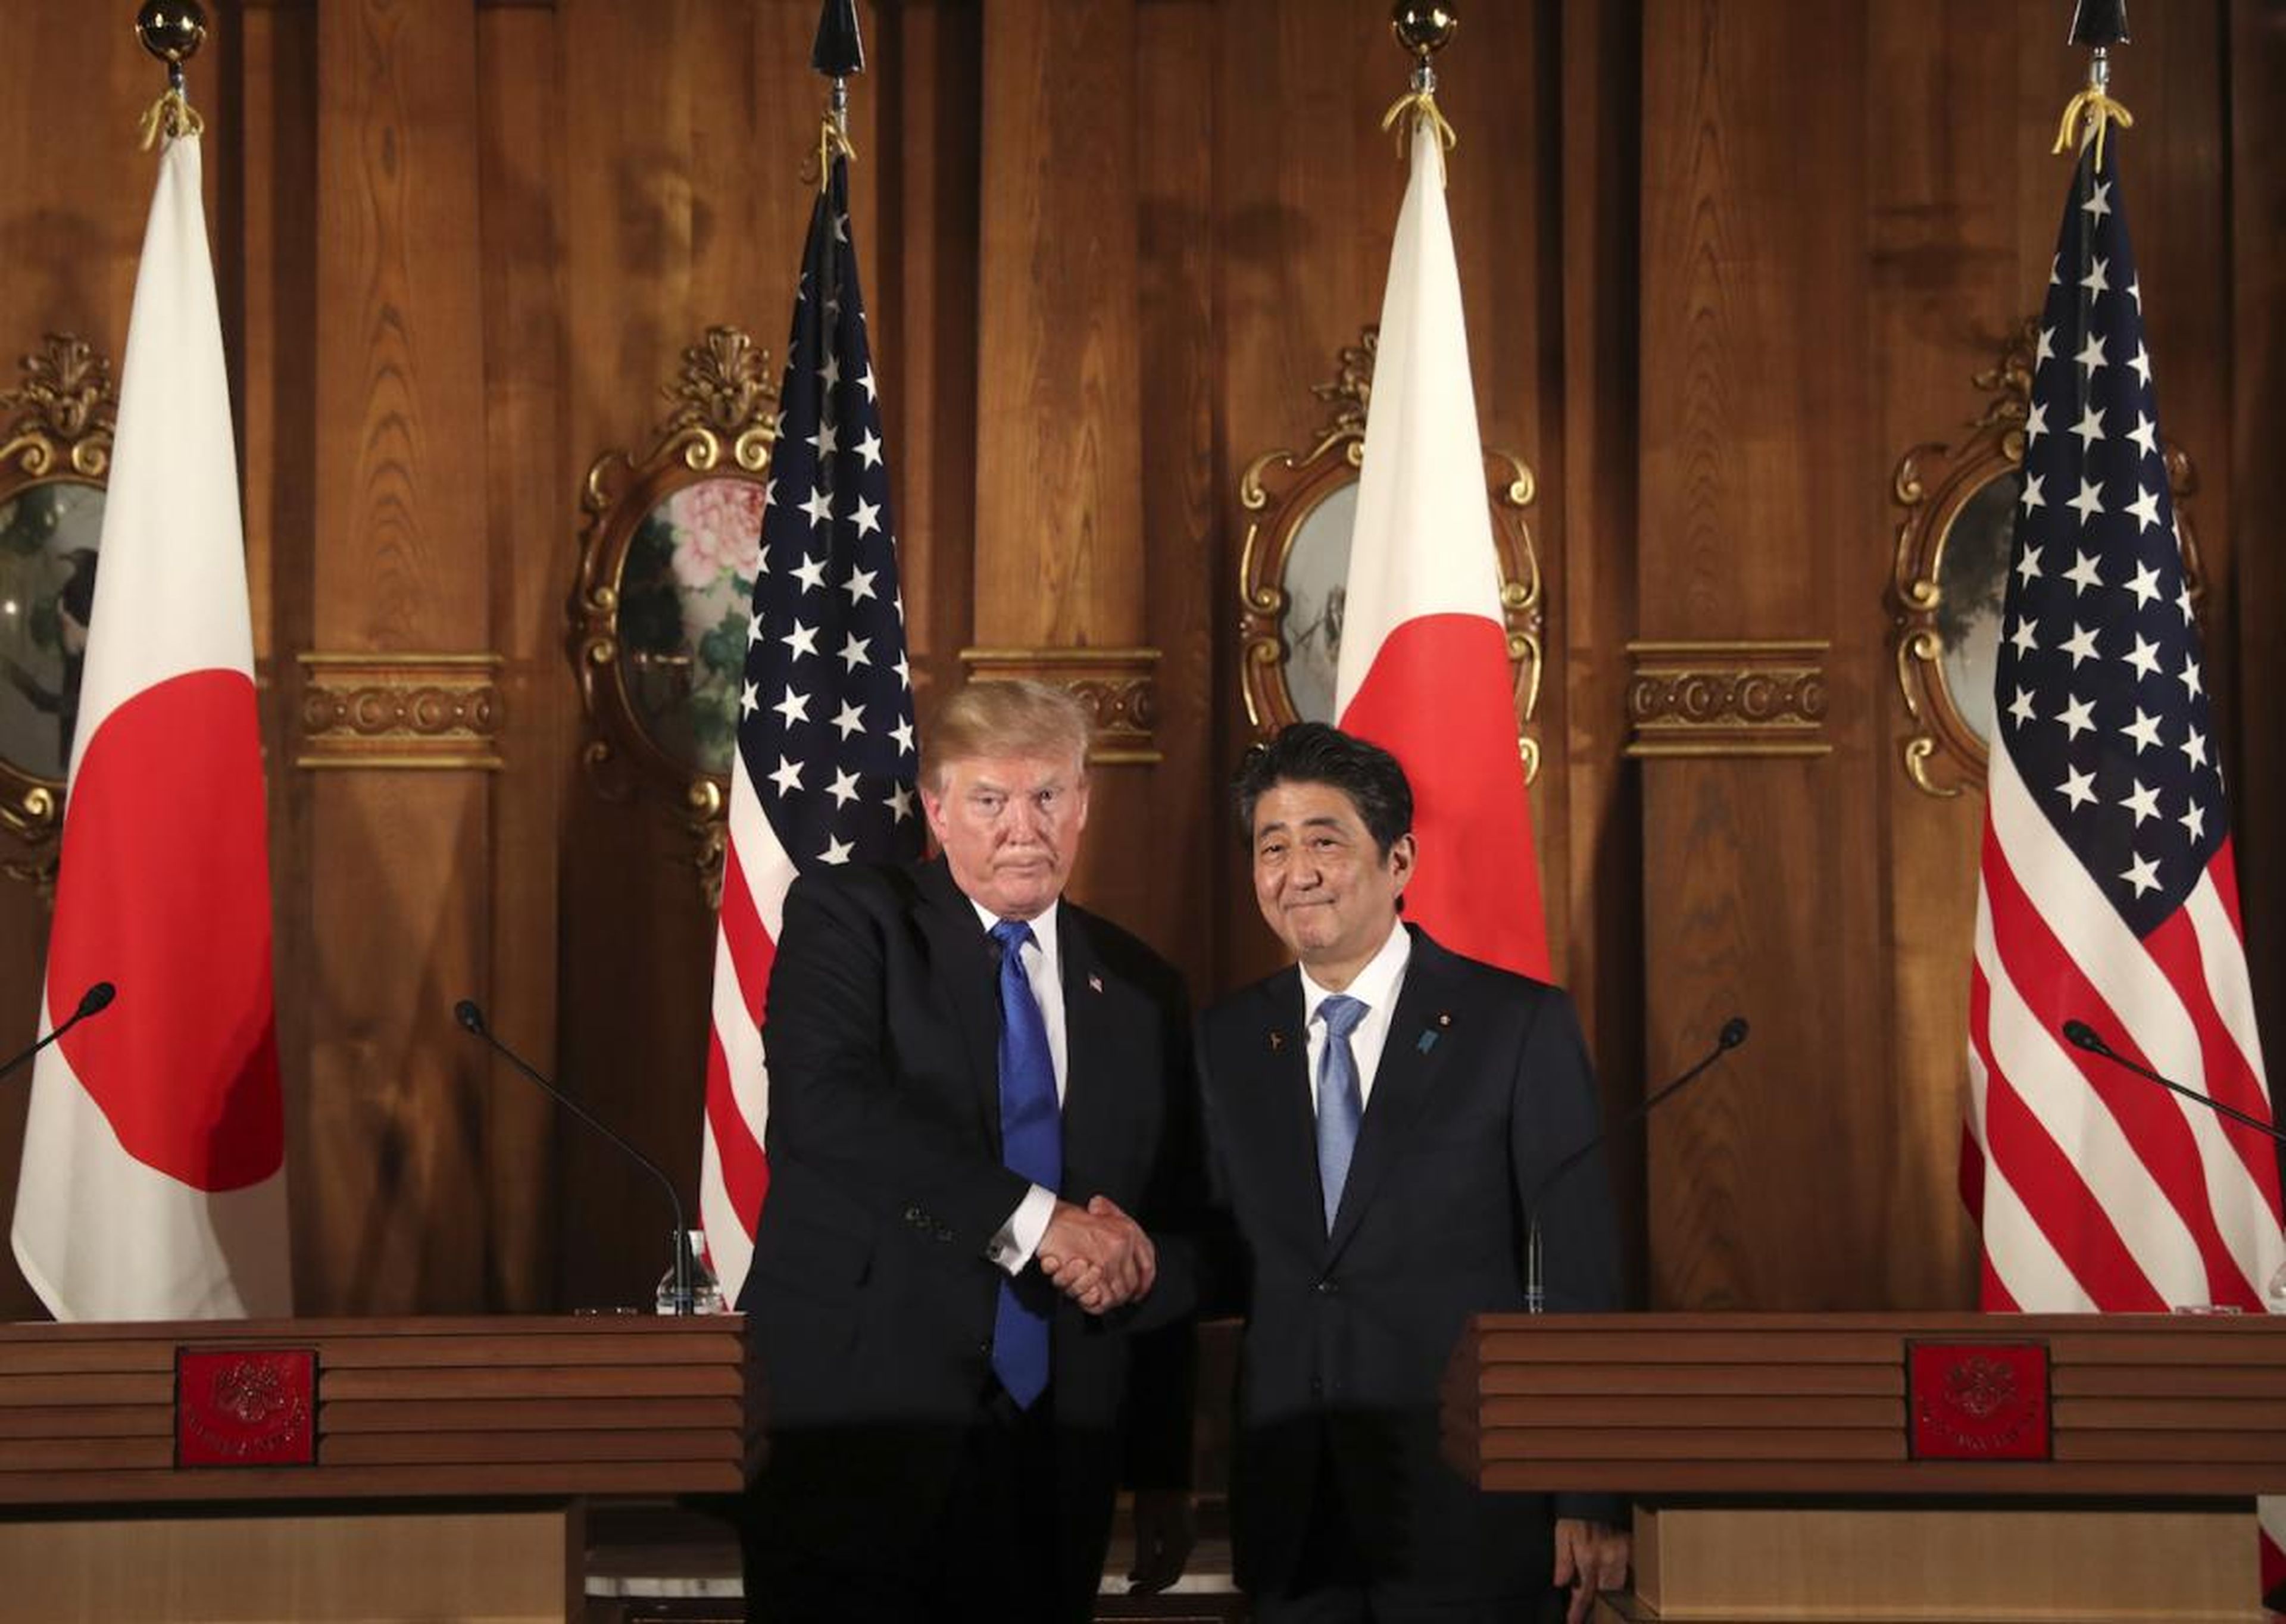 Trump signs trade deal with Japan as tensions escalate with China and the EU